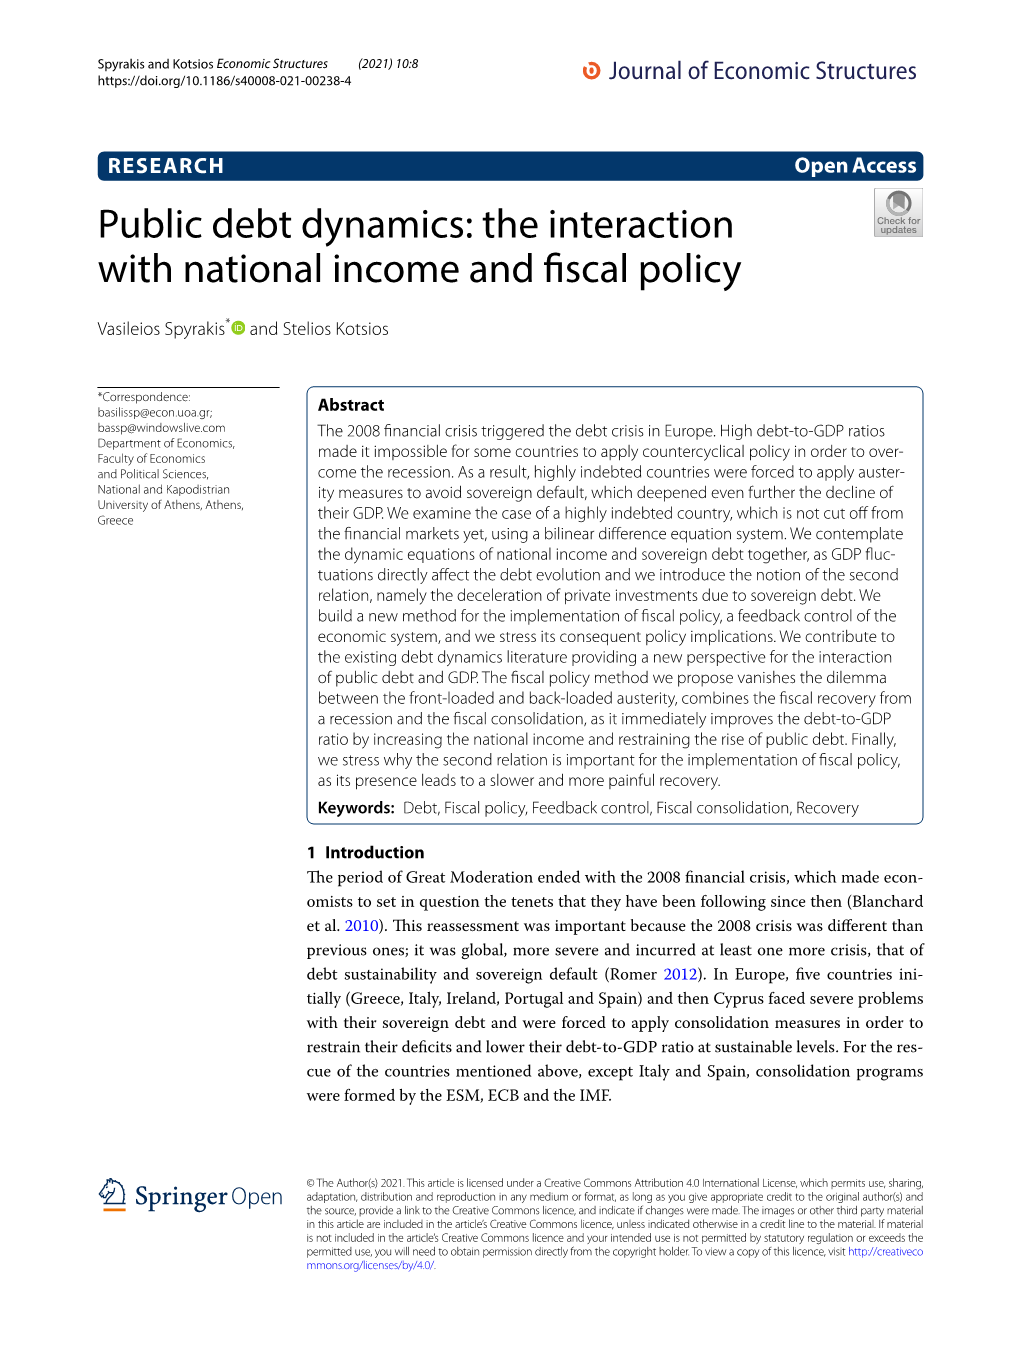 Public Debt Dynamics: the Interaction with National Income and Fiscal